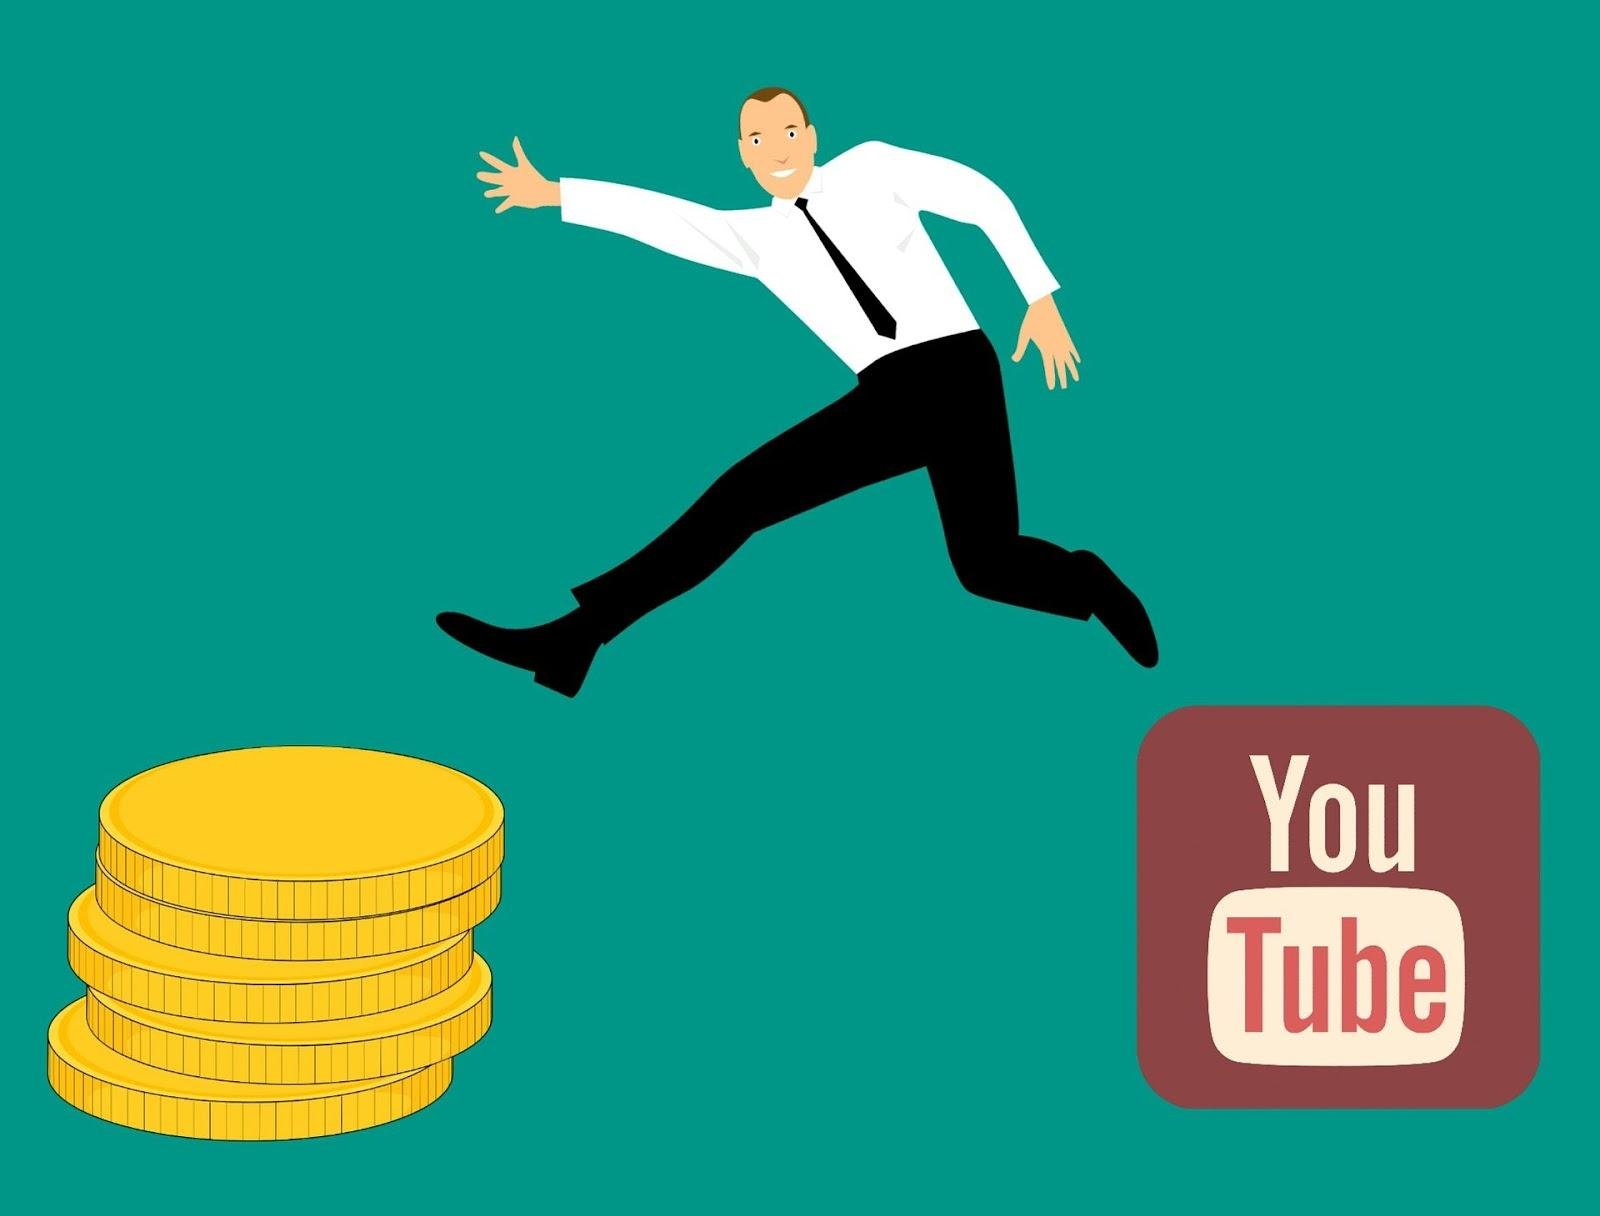 Making Money on YouTube - 5 Top Strategies to Start Making Money on YouTube - 2